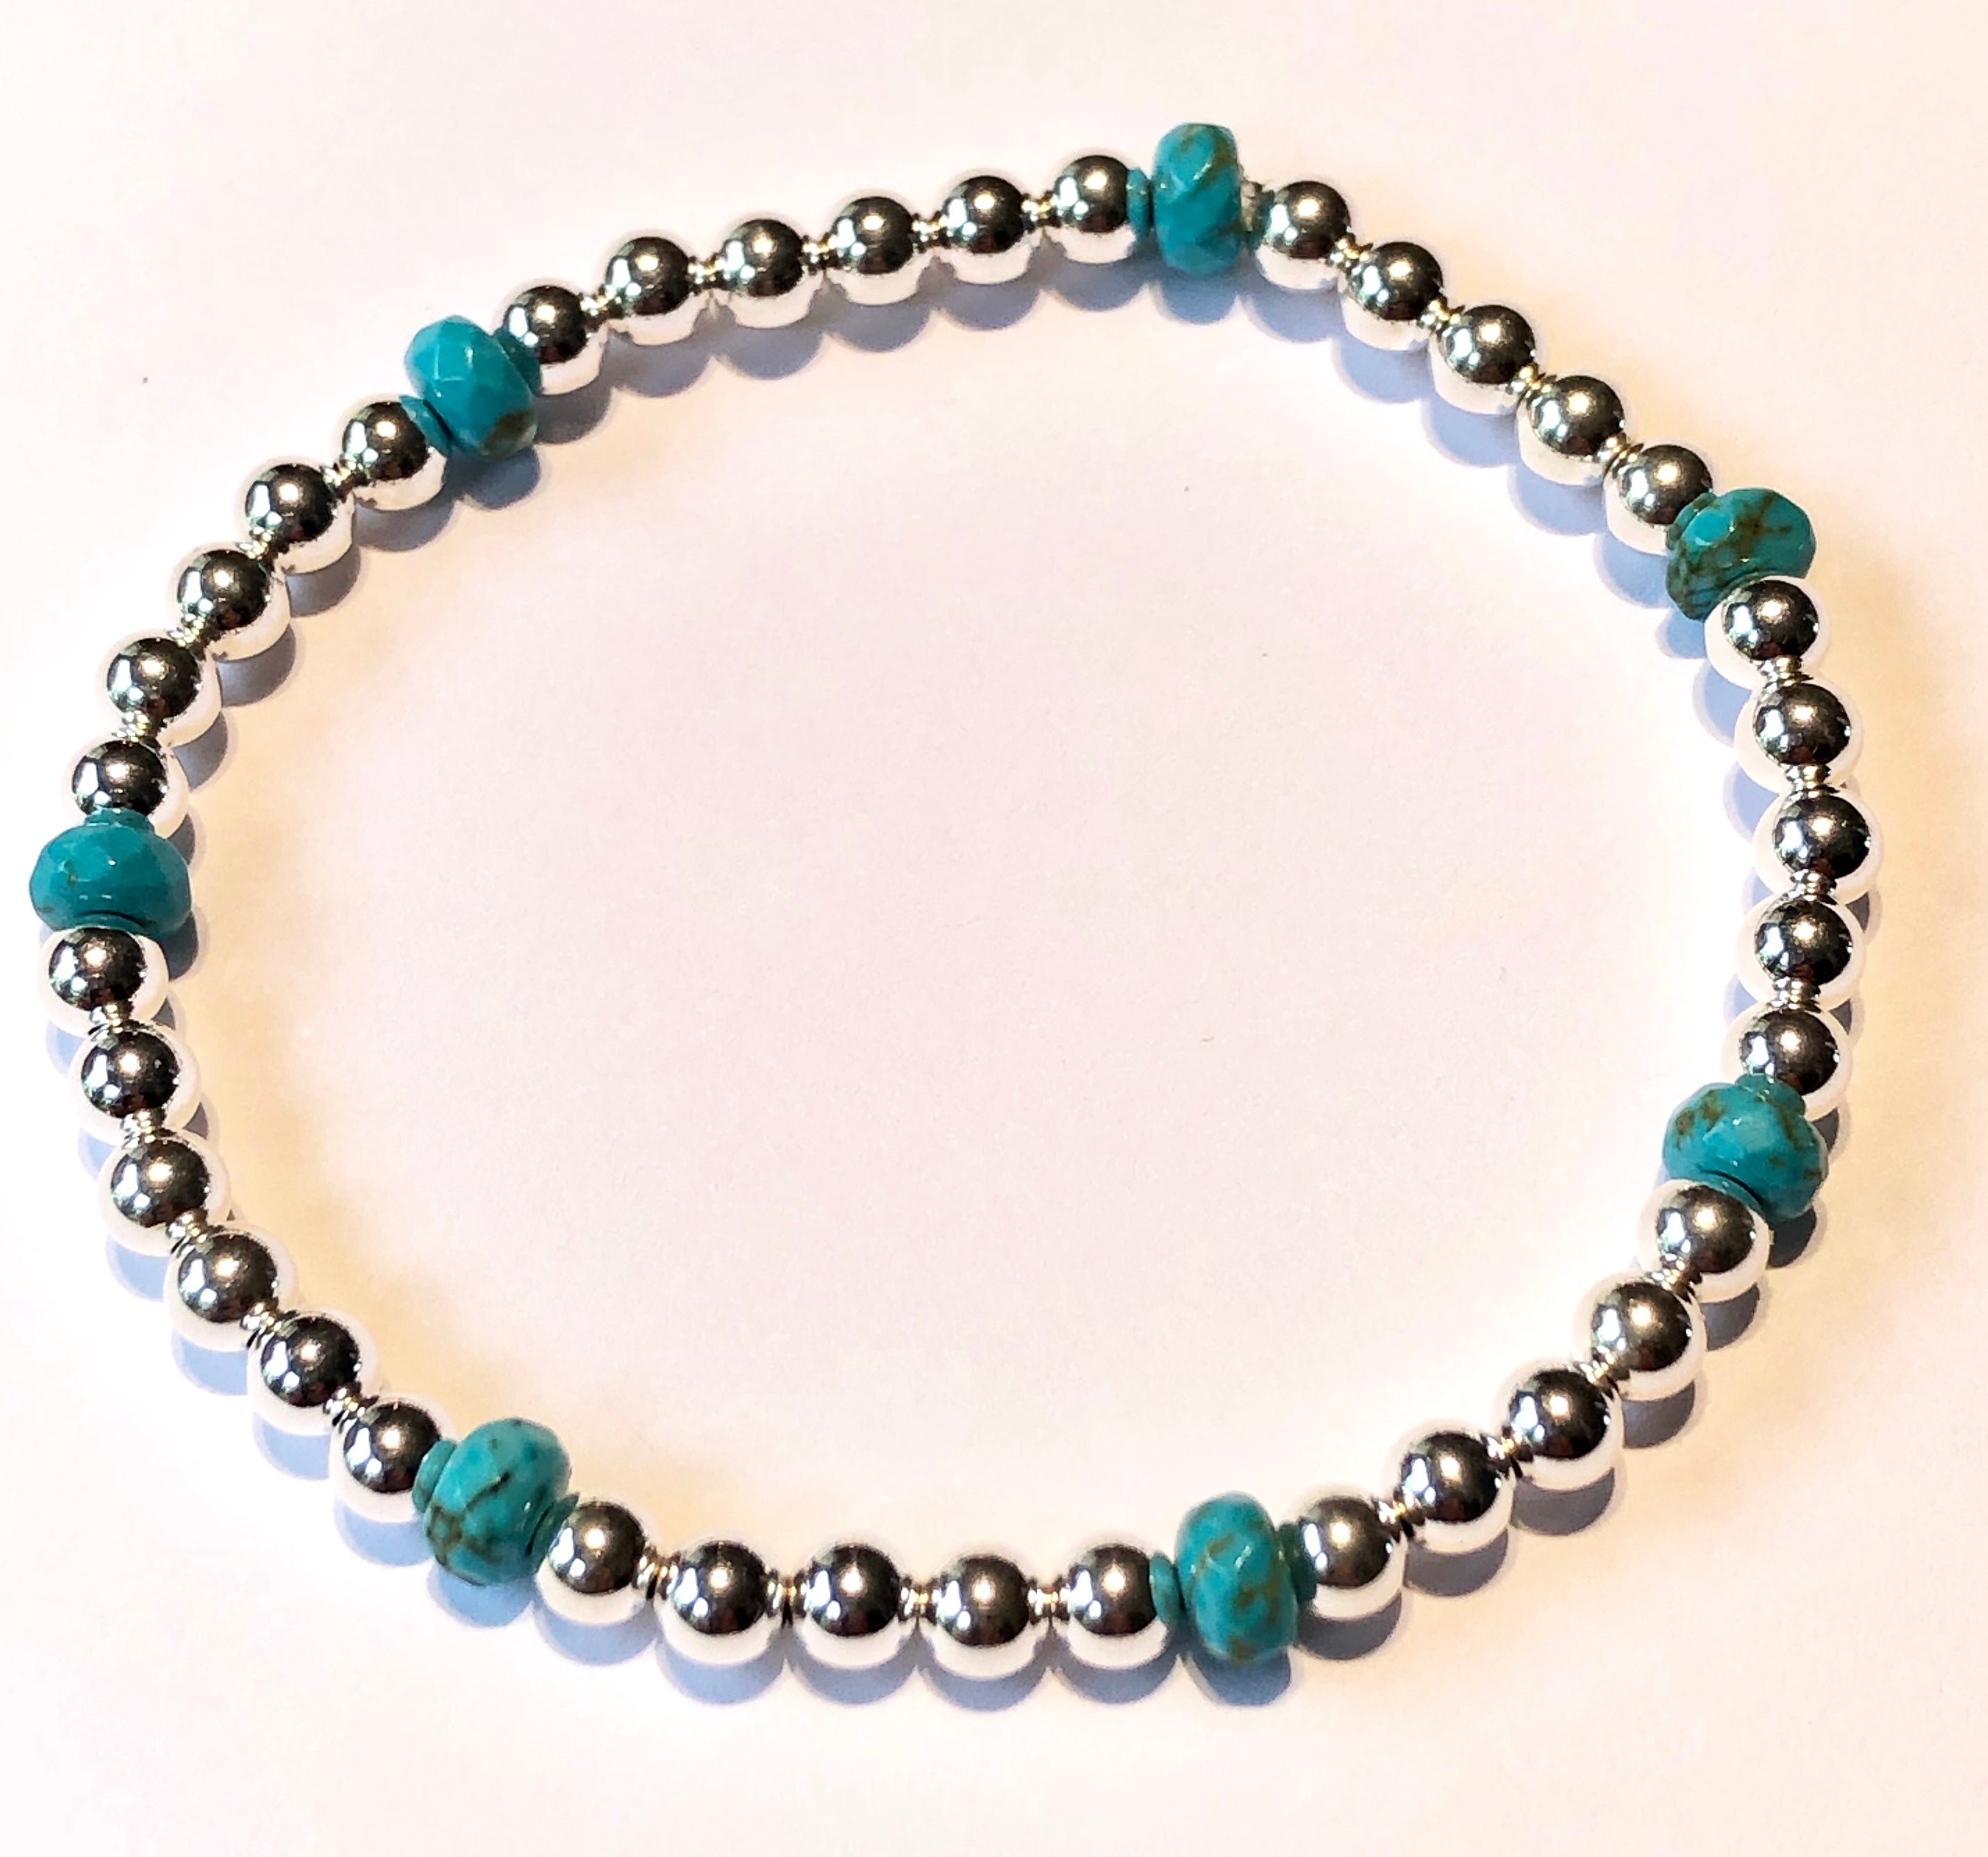 4mm Sterling Silver Bead Bracelet with 7 Turquoise Beads